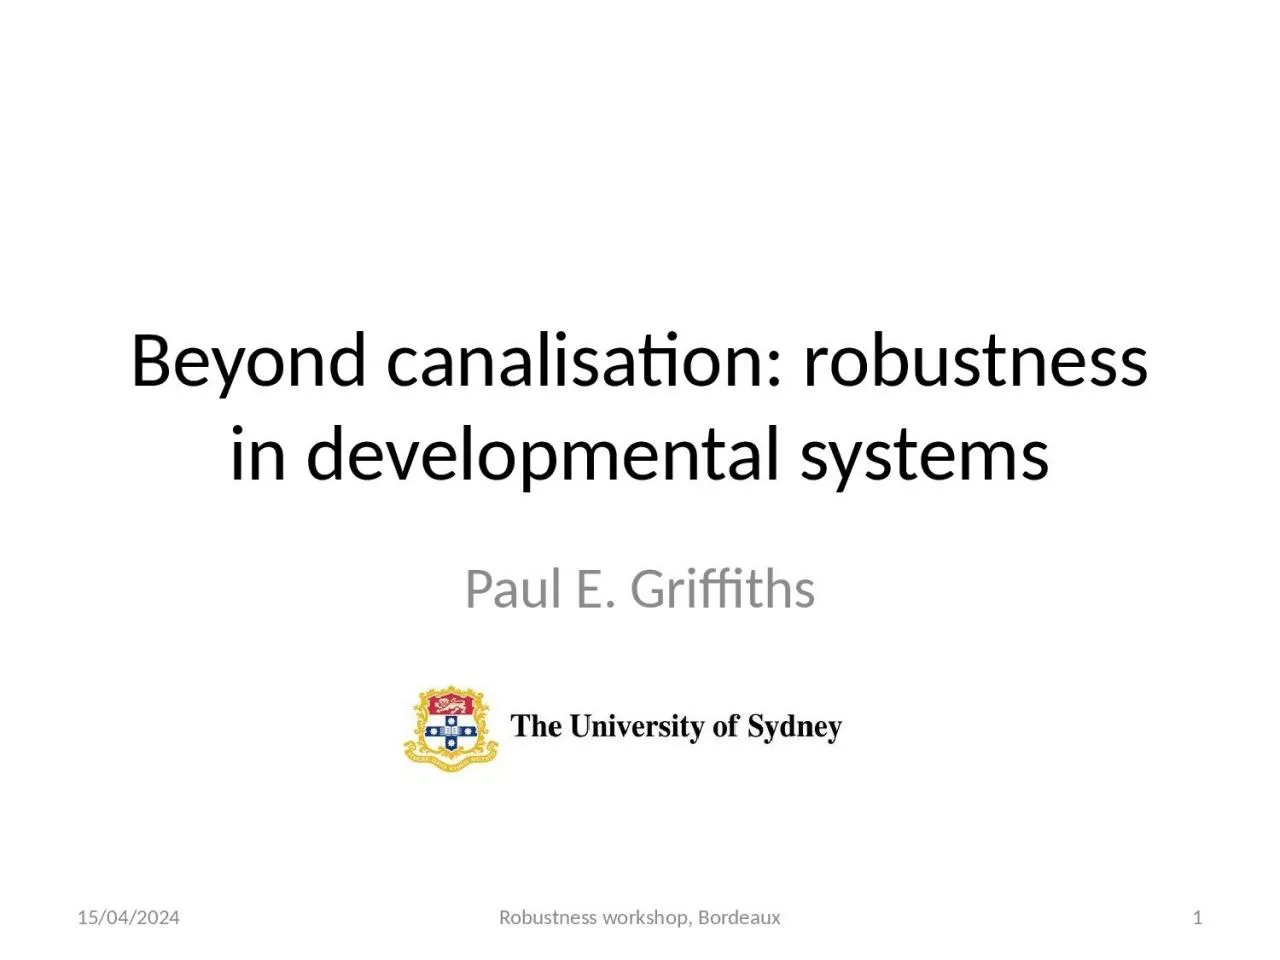 Beyond canalisation: robustness in developmental systems